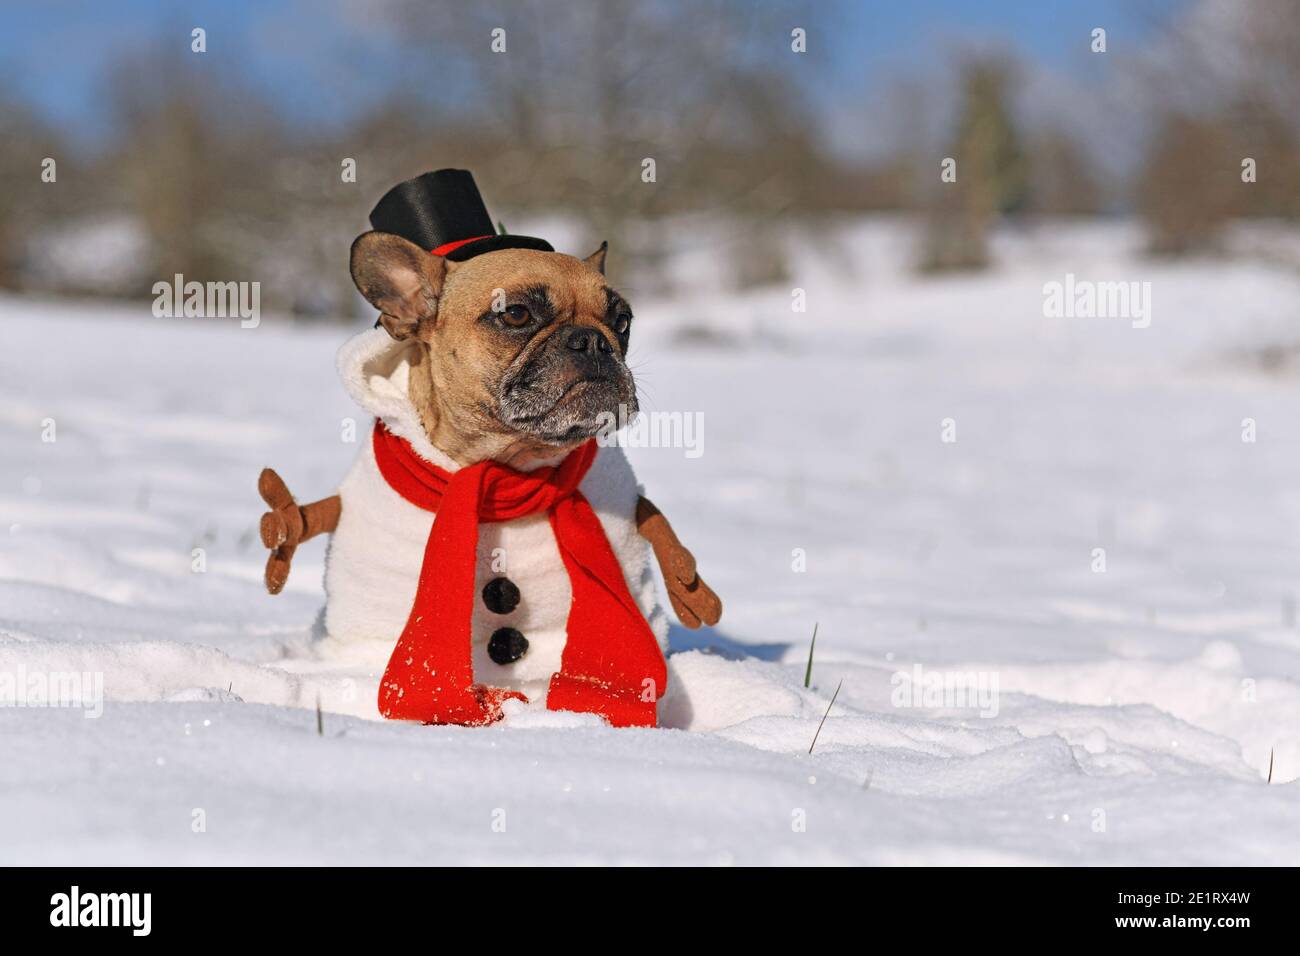 Funny French Bulldog dog dressed up as snowman with full body suit costume with red scarf, fake stick arms and top hat in winter snow landscape Stock Photo